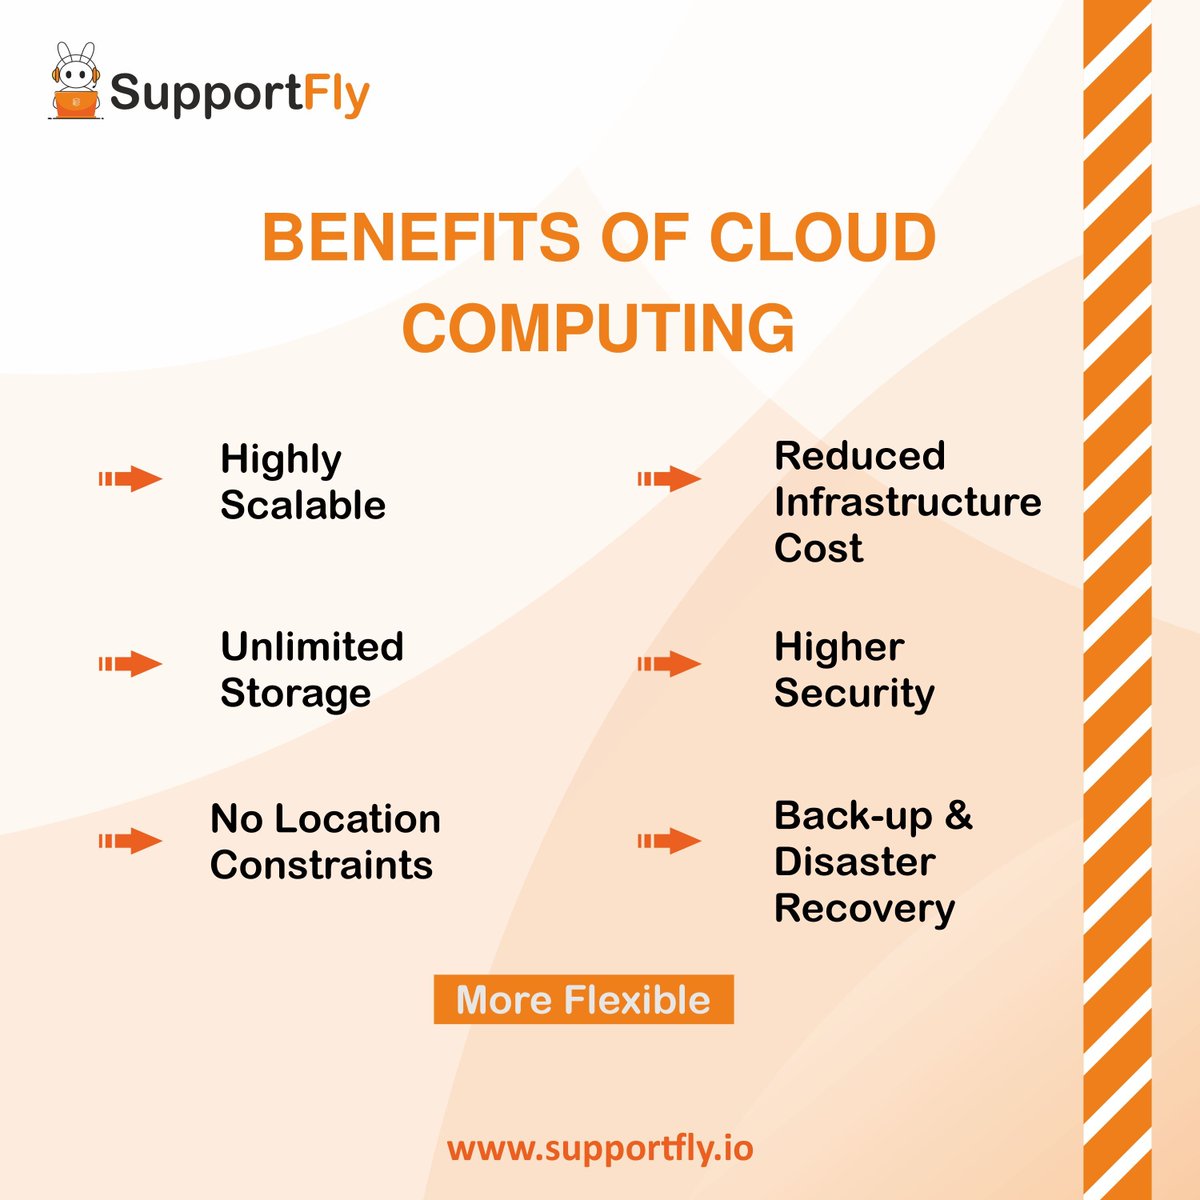 Why move to the cloud? Enjoy scalability, flexibility, and cost-efficiency! Discover how SupportFly can enhance your business with our cloud computing solutions today.
#server #cloud #cloudcomputing #cloudserver #servermanagement #serversolution #supportfly #serverprovider